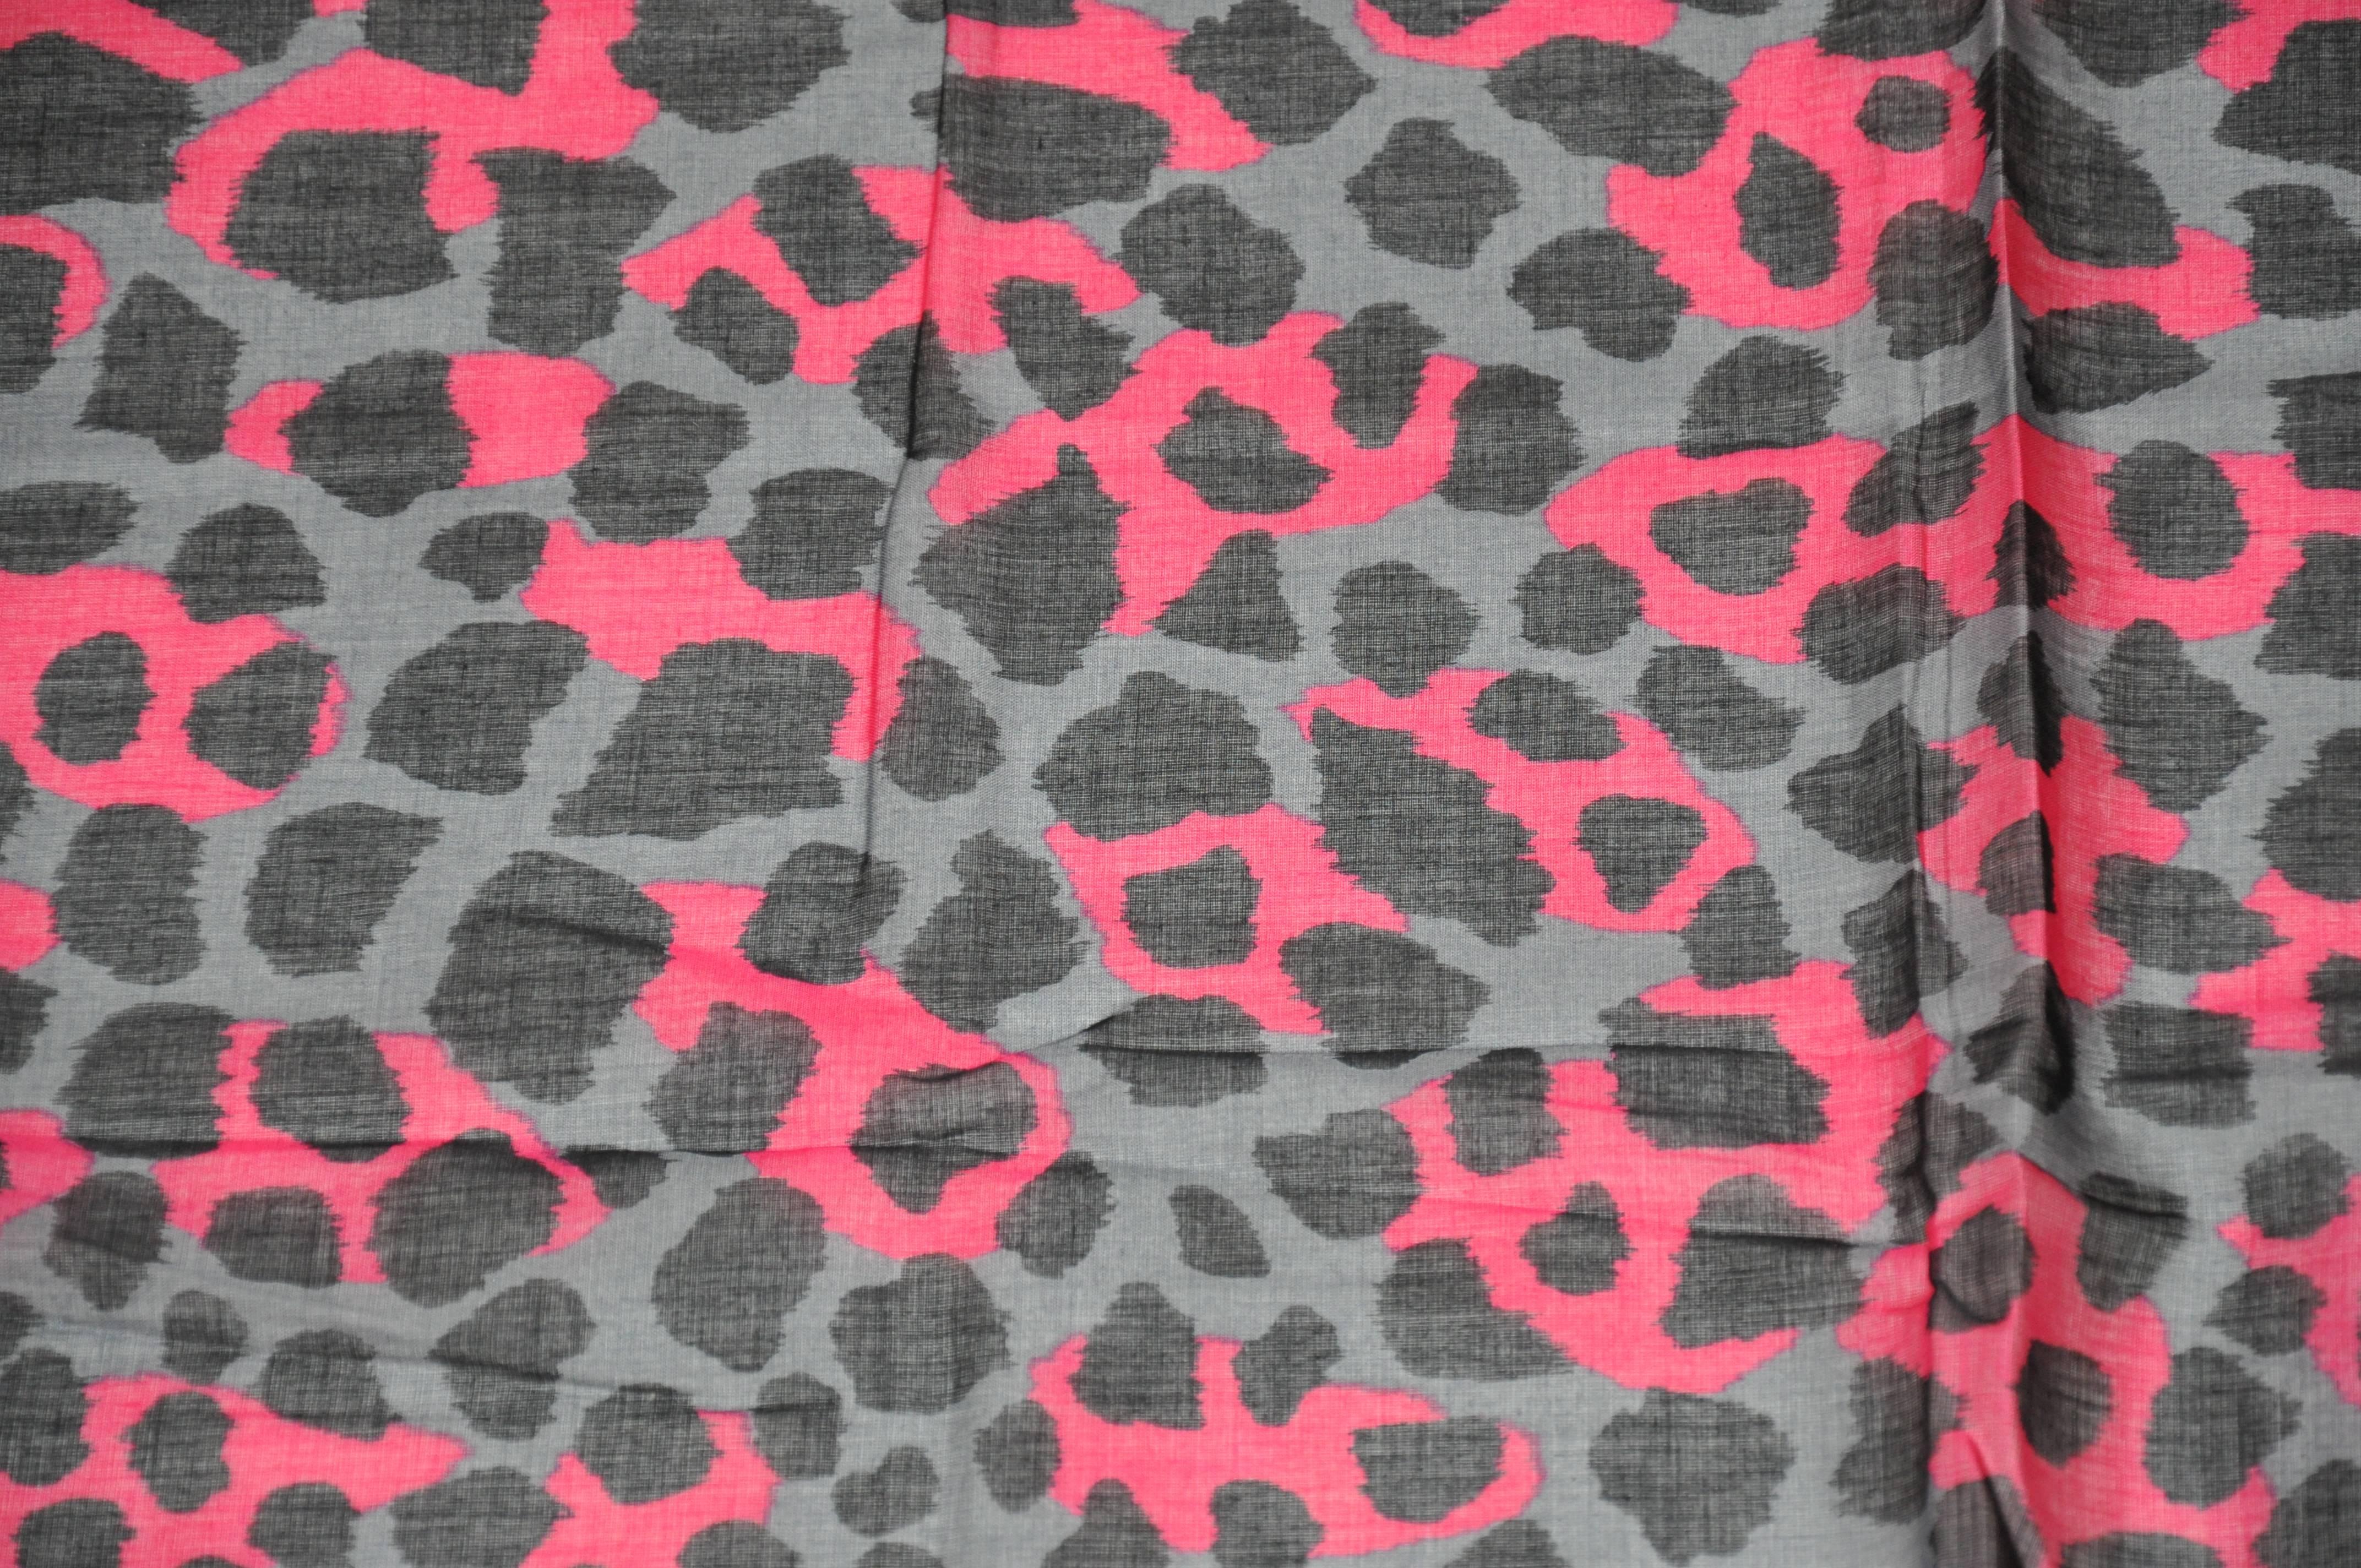 Yves Saint Laurent Huge Cotton Multi-Leopard with Gray Border Scarf In Good Condition For Sale In New York, NY